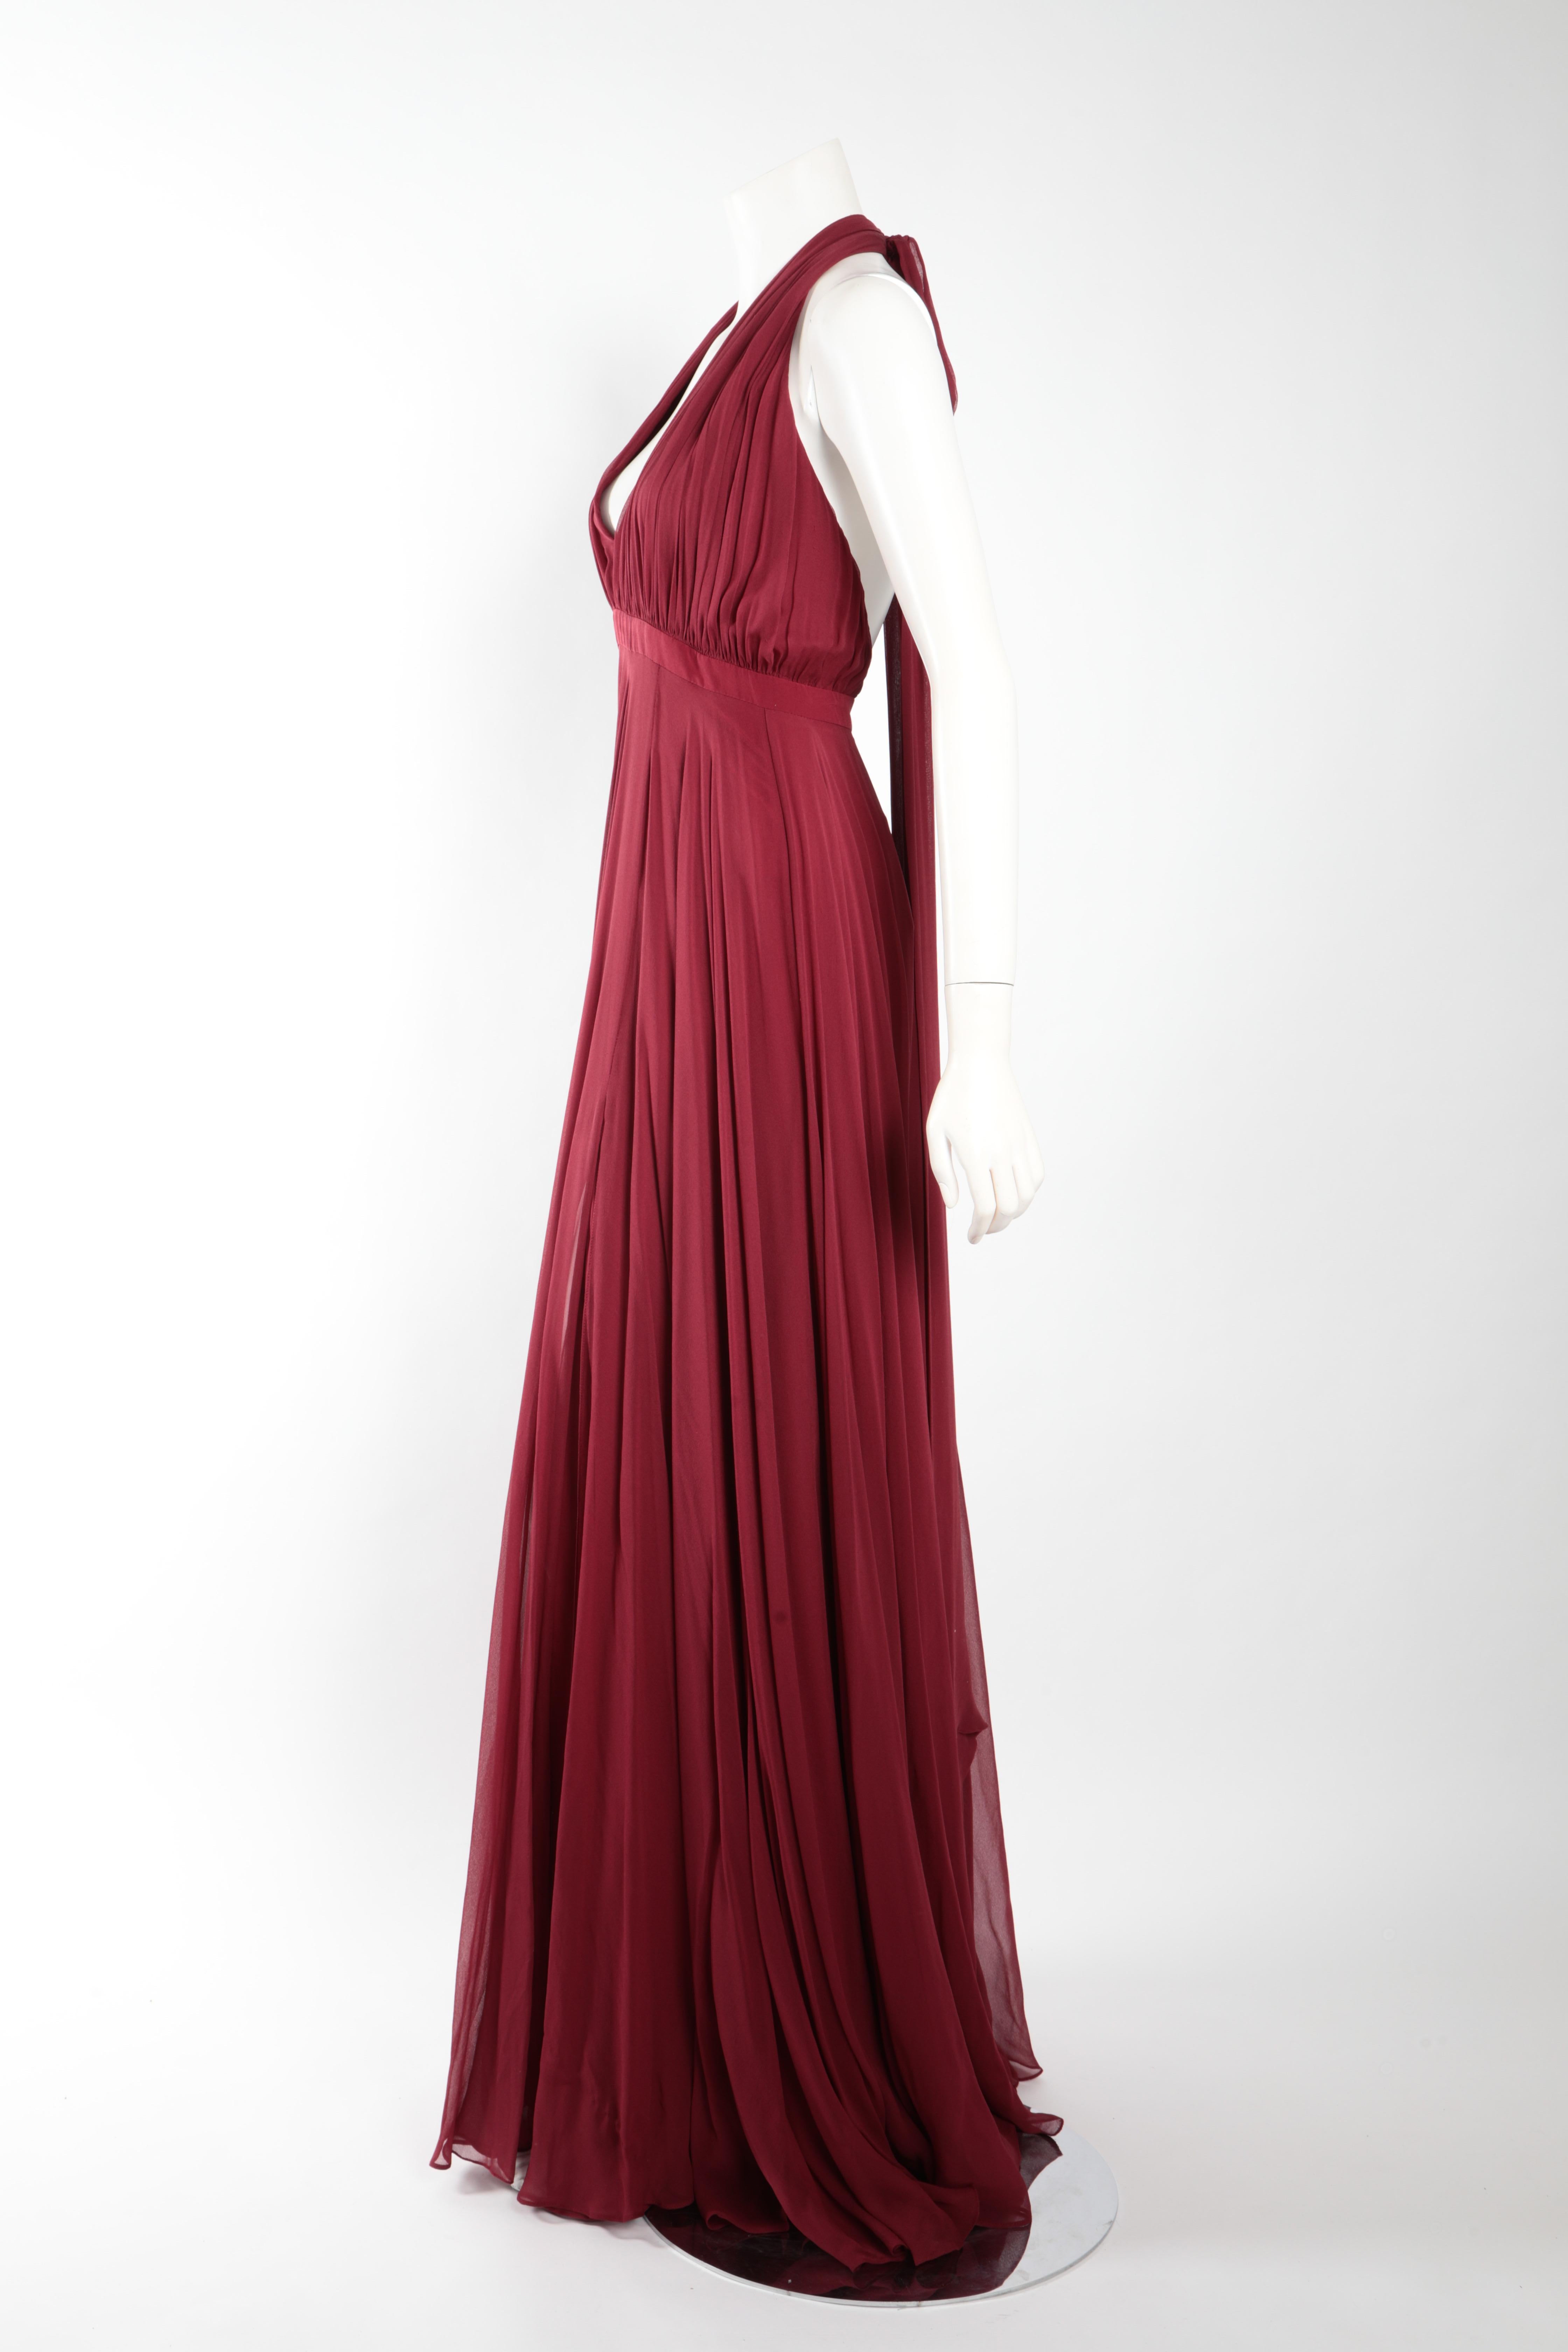 Floor-length burgundy chiffon gown by Prabal Gurung.
Halter tie neck, knife pleated skirt, with deep side slit. Fits size US 10. 
100% Silk